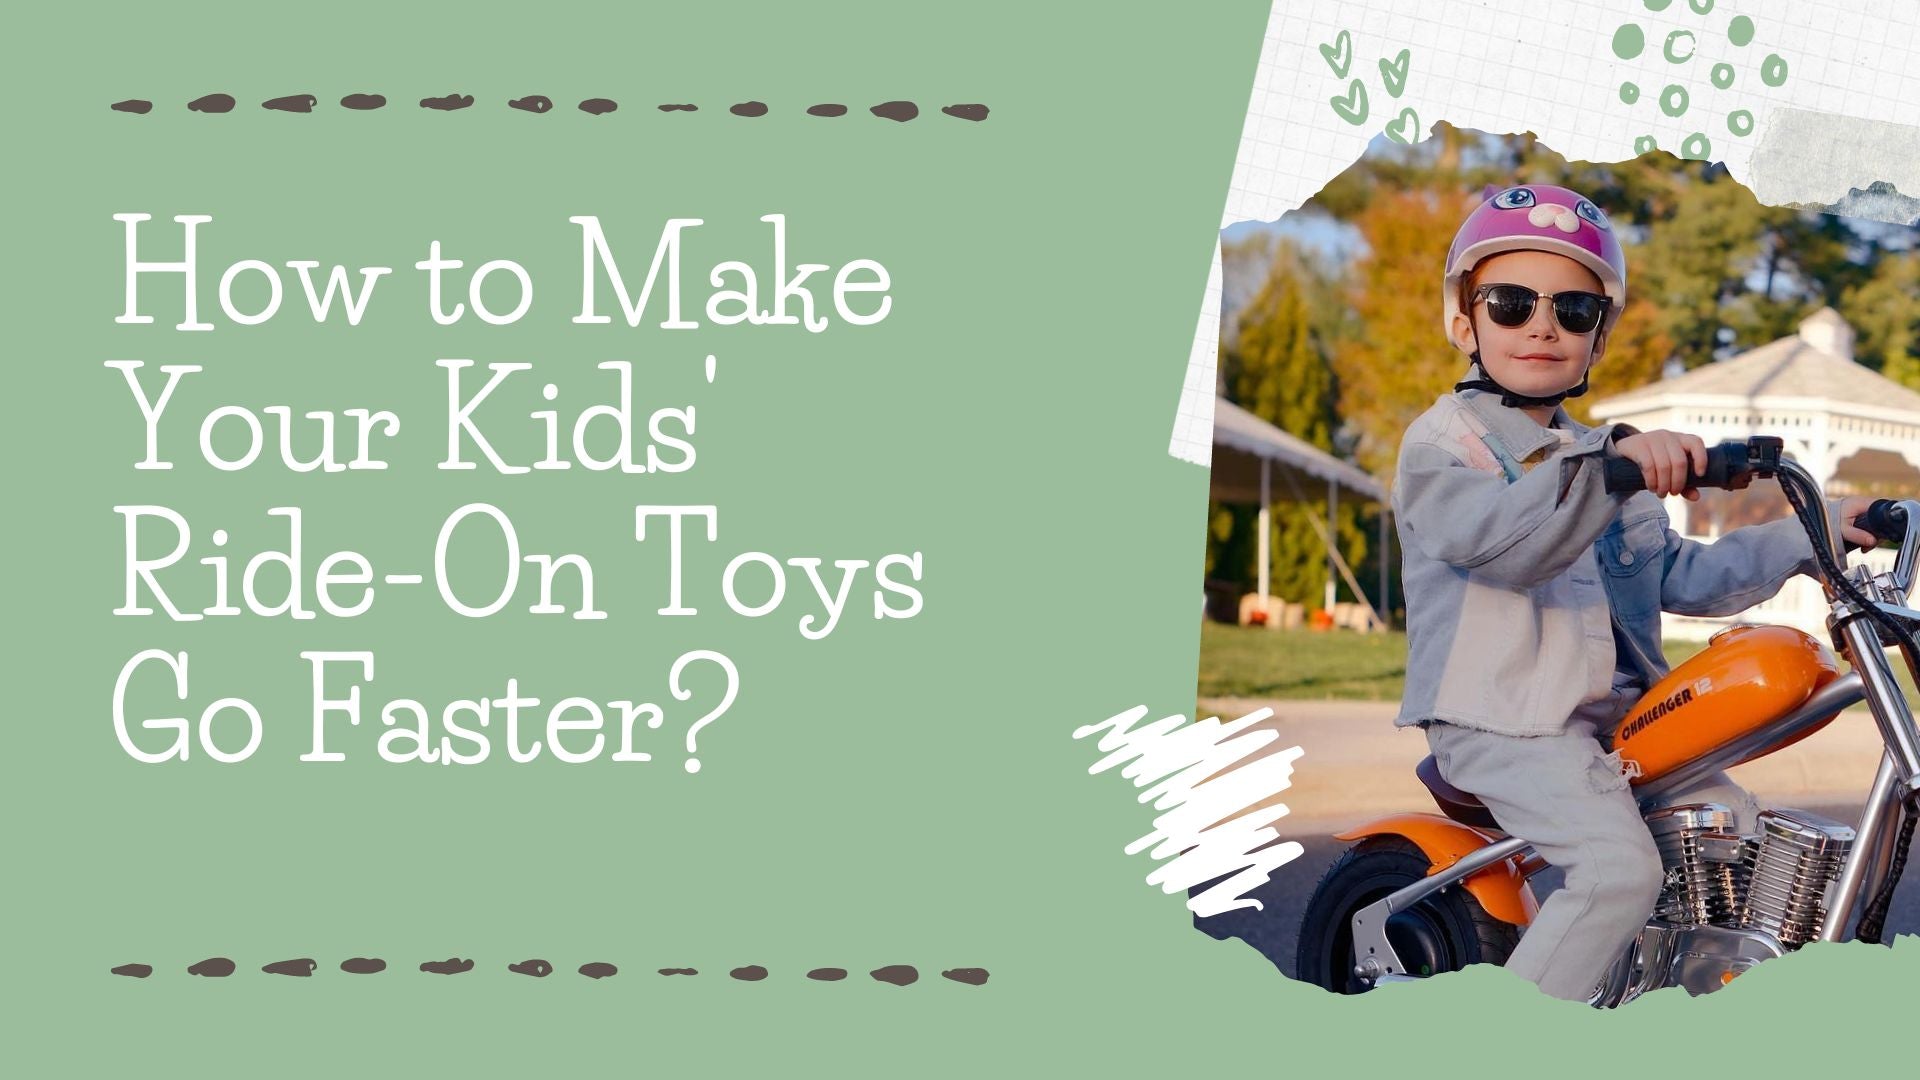 How to Make Your Kids' Ride-On Toys Go Faster?